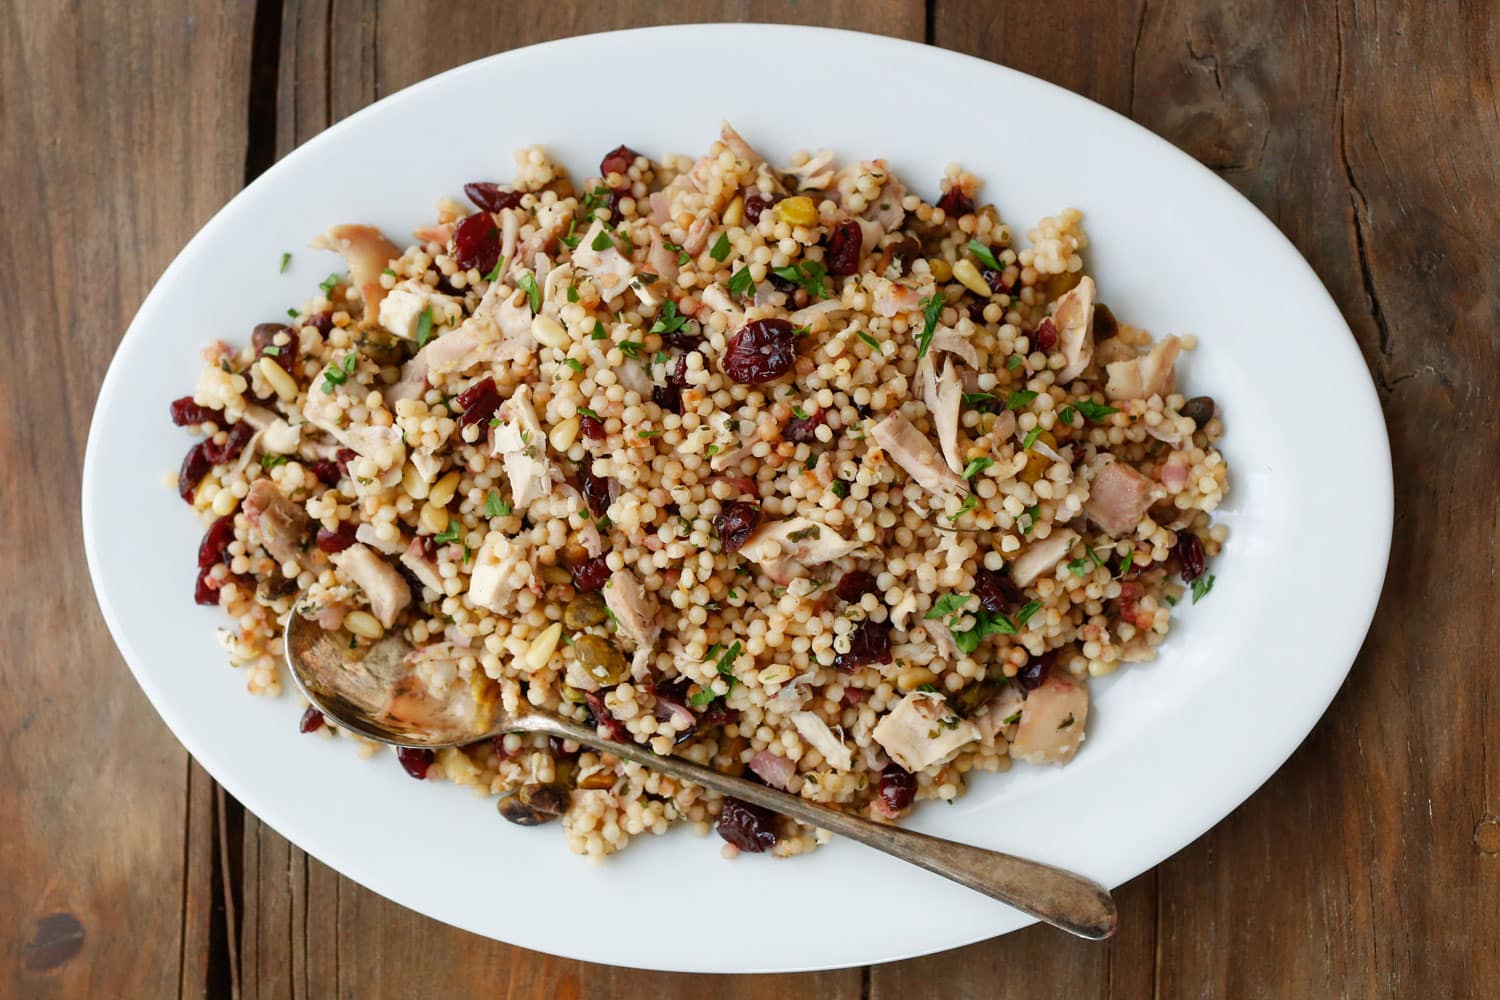 Lemon Couscous with Craisins and Chicken